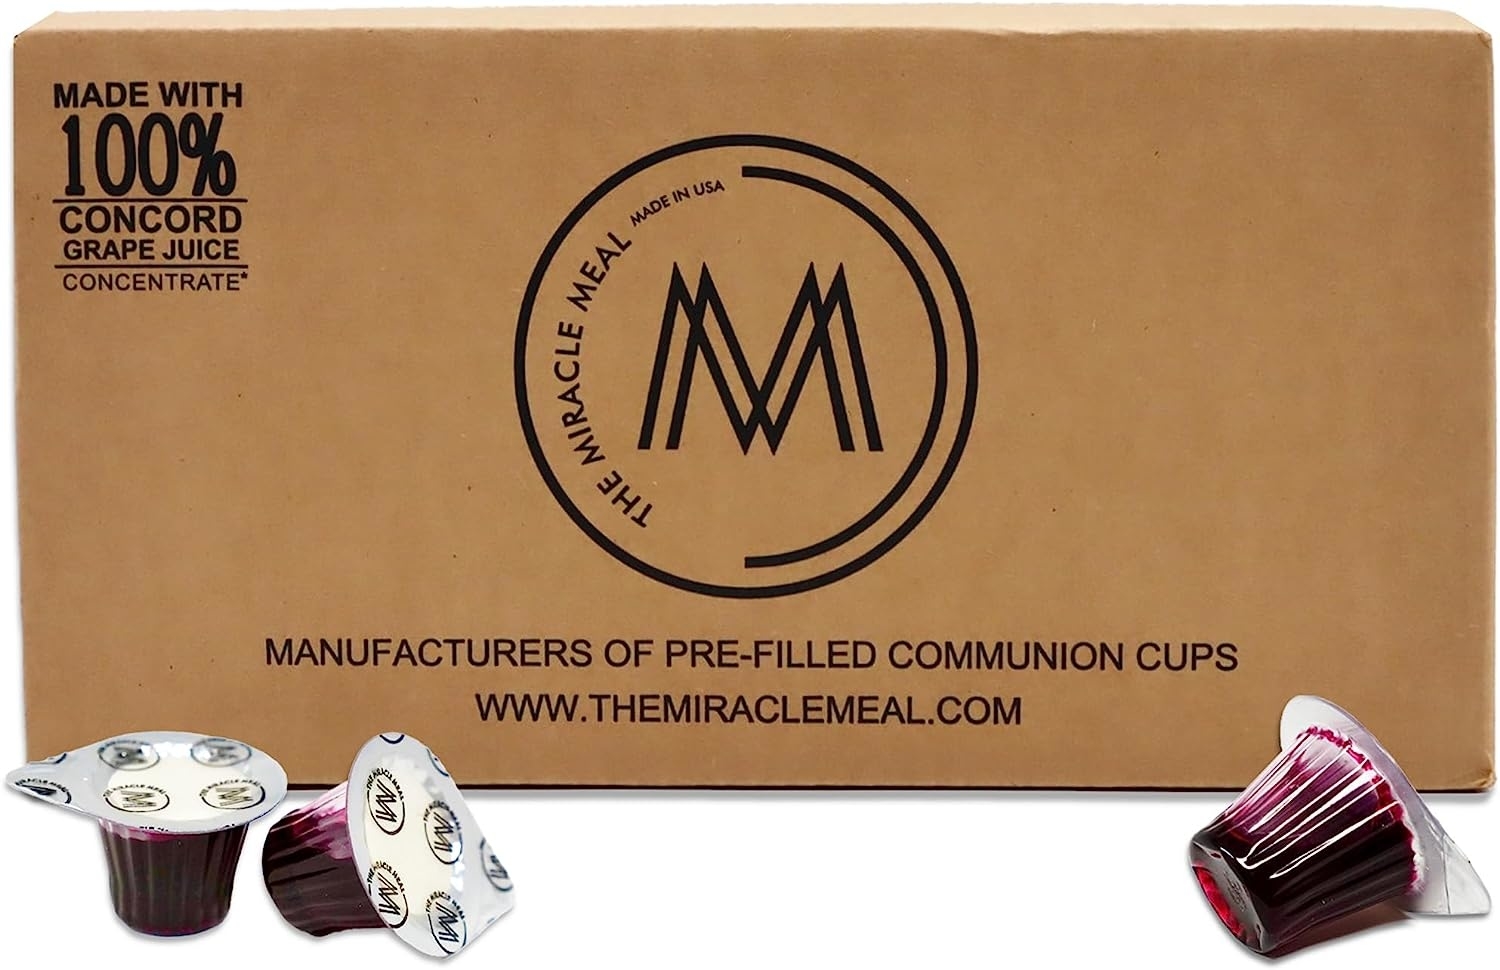 The Miracle Meal Pre-filled Communion Box of 1000